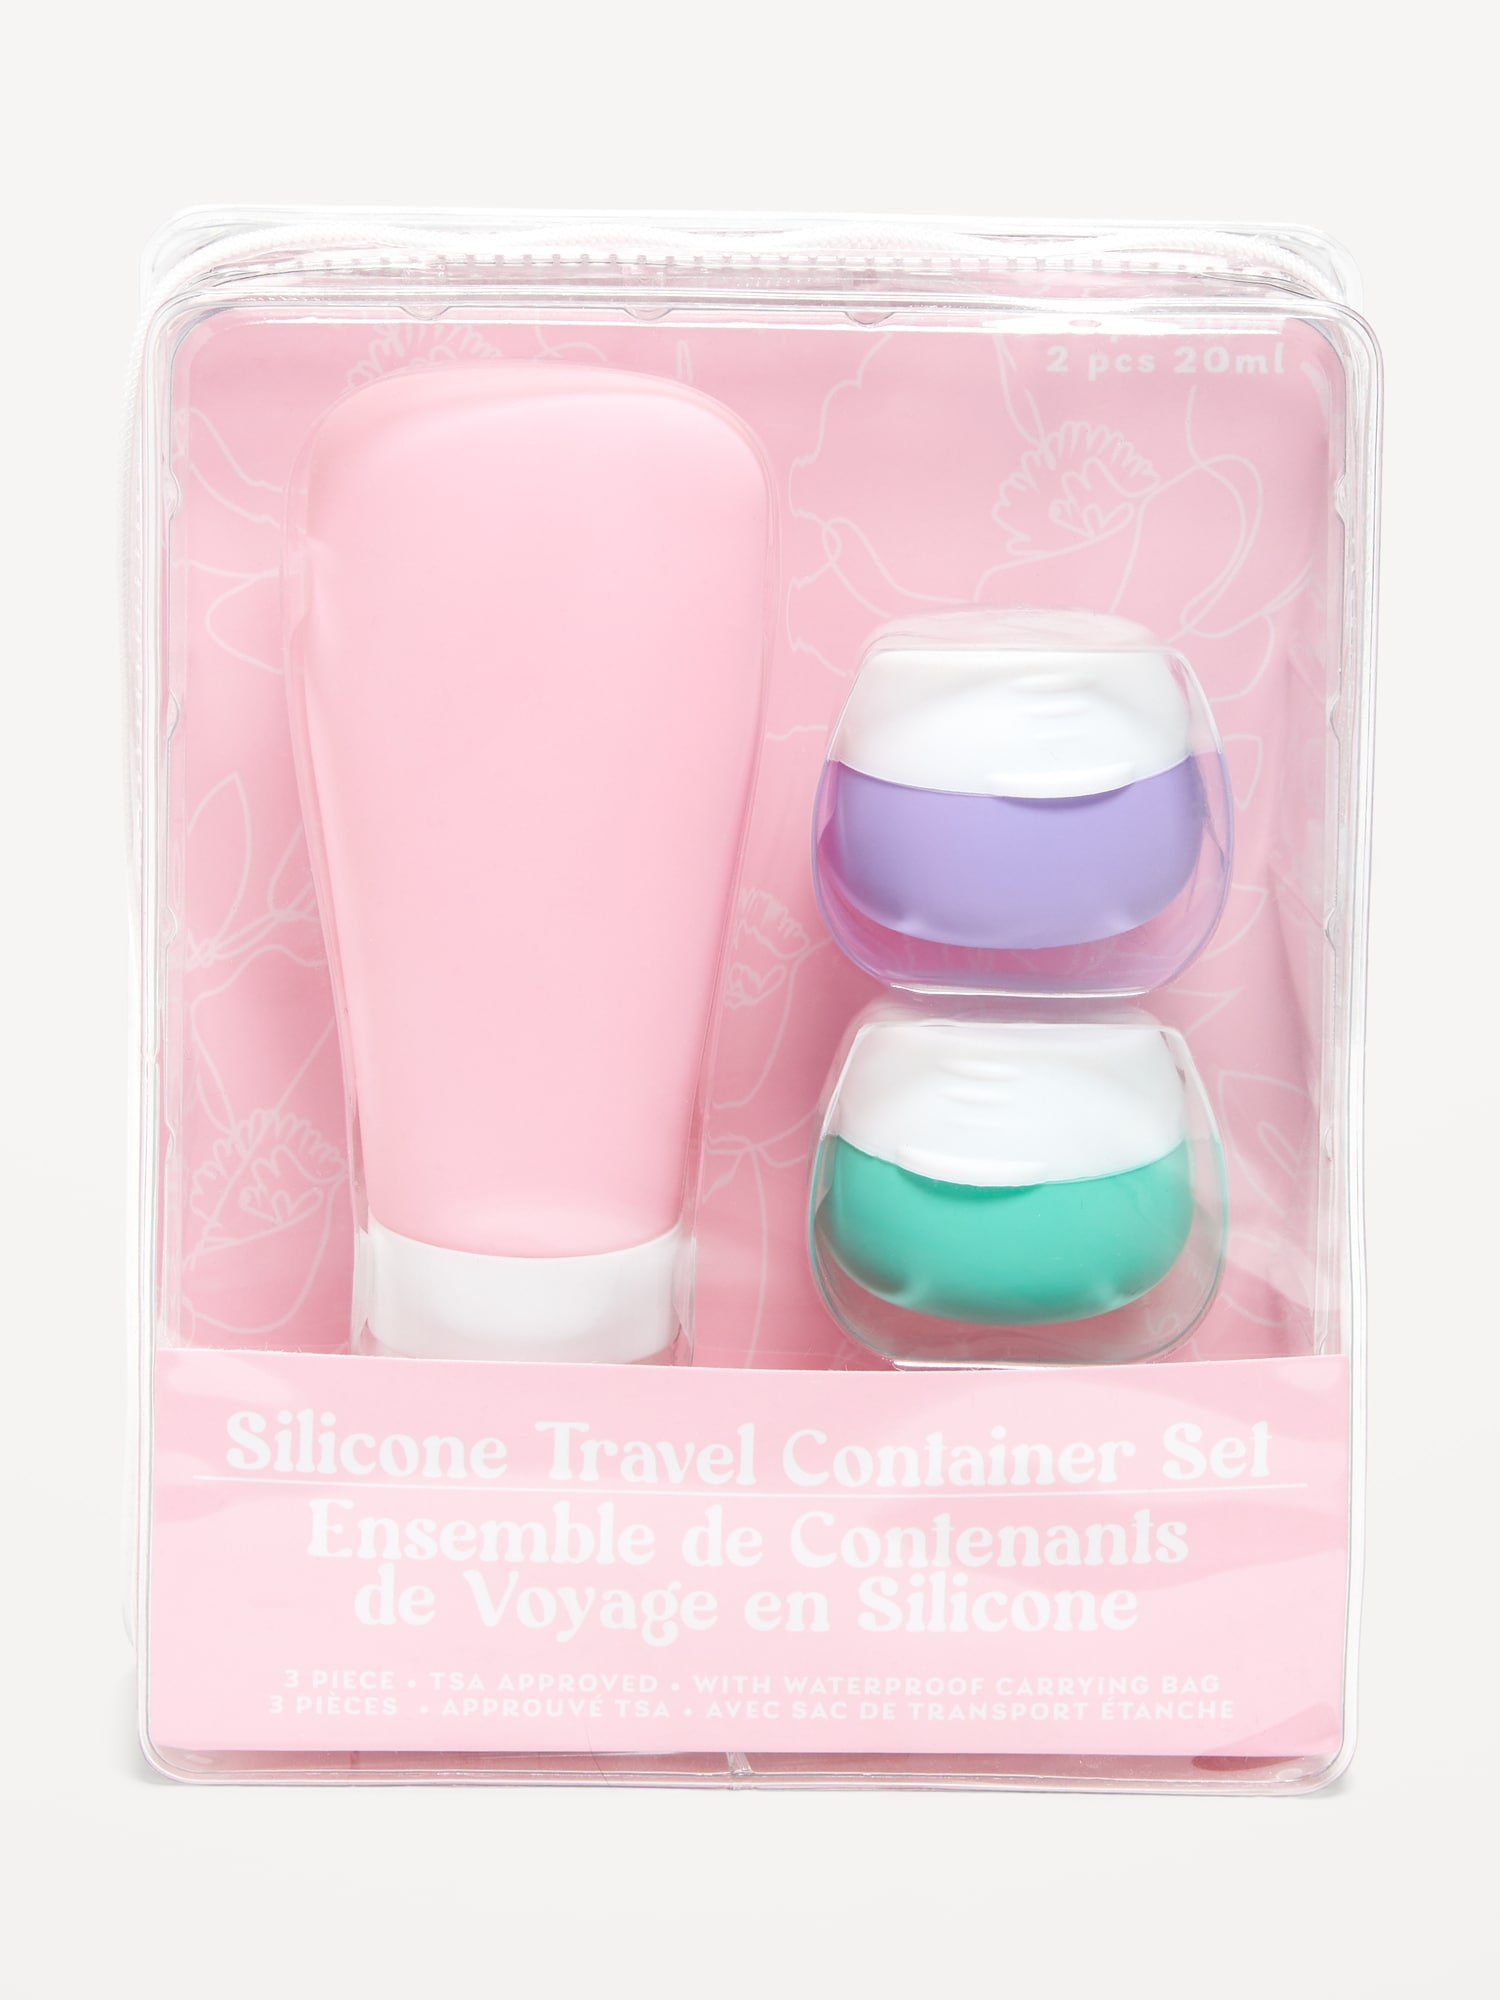 Outtek™ Silicone Travel Container Set